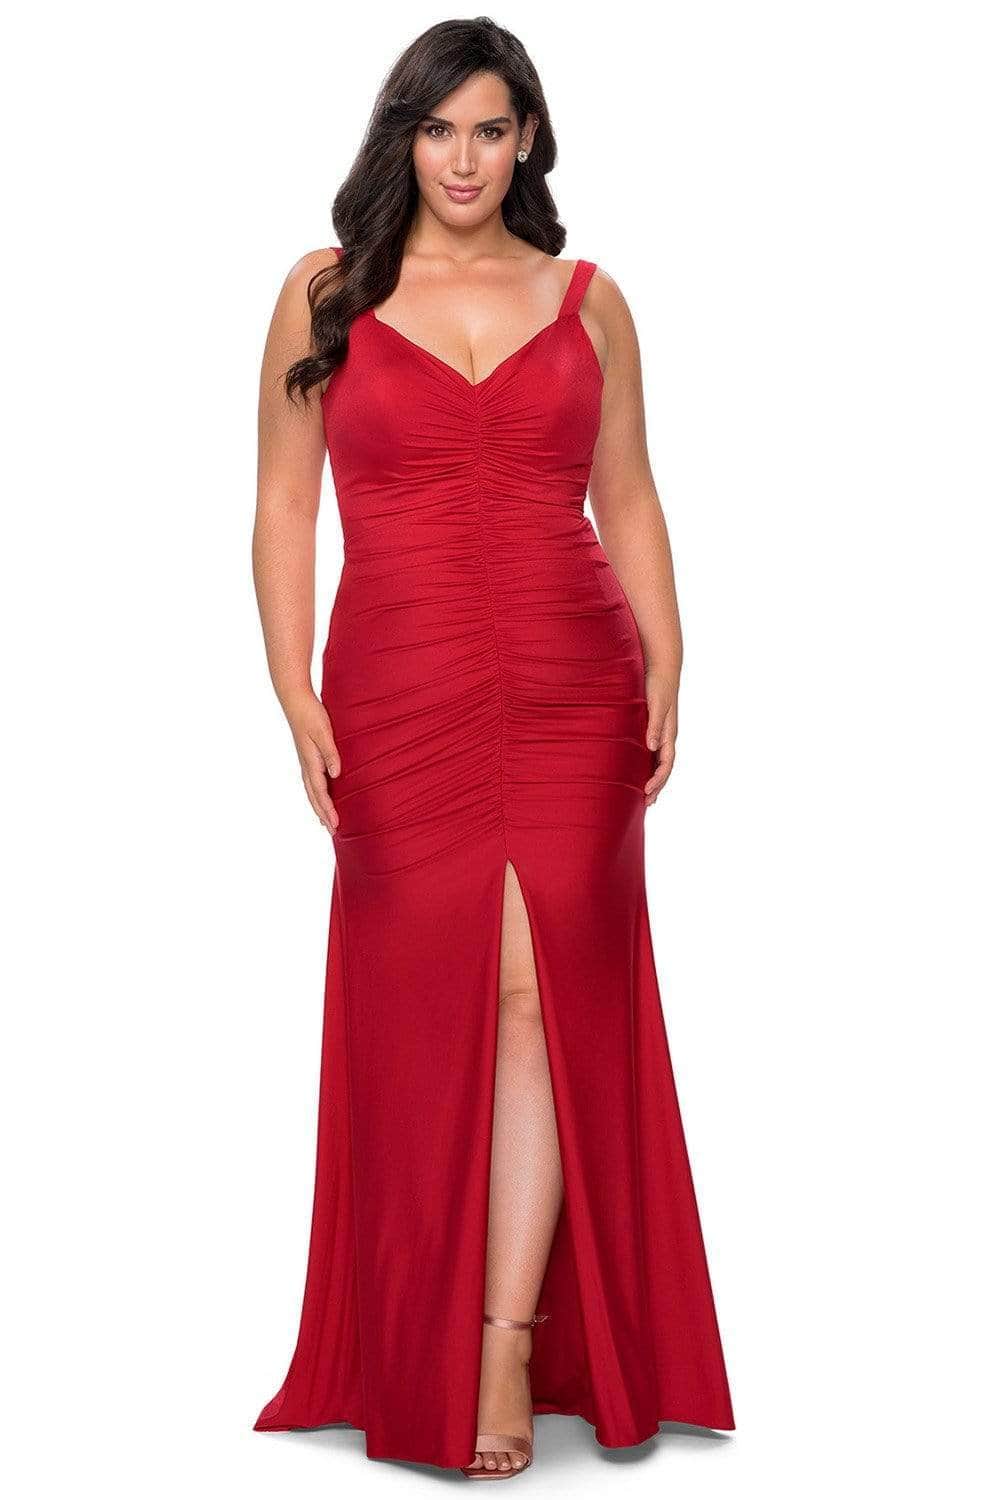 La Femme - Ruched Jersey Trumpet Dress with Slit 29027SC - 1 pc Red In Size 12W Available CCSALE 12W / Red